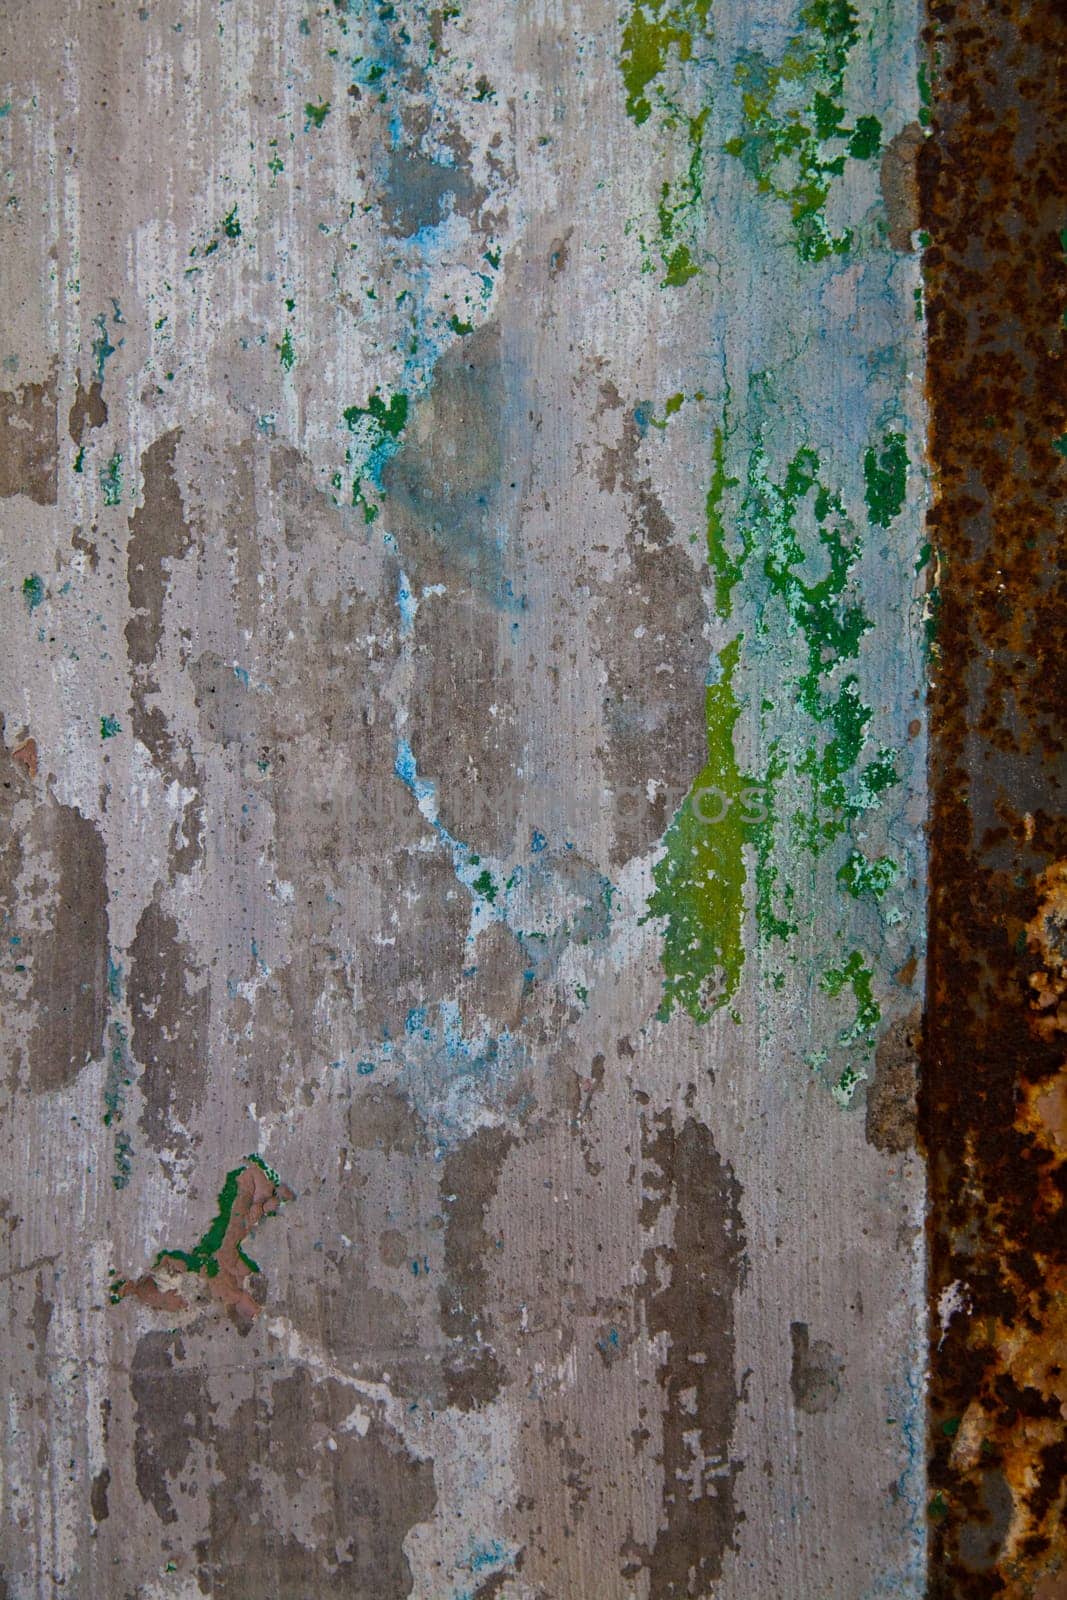 Weathered metal sheet with peeling paint and rust, showcasing the passage of time and nature's relentless decay. Industrial grunge texture from the abandoned Pierceton Factory in Indiana.